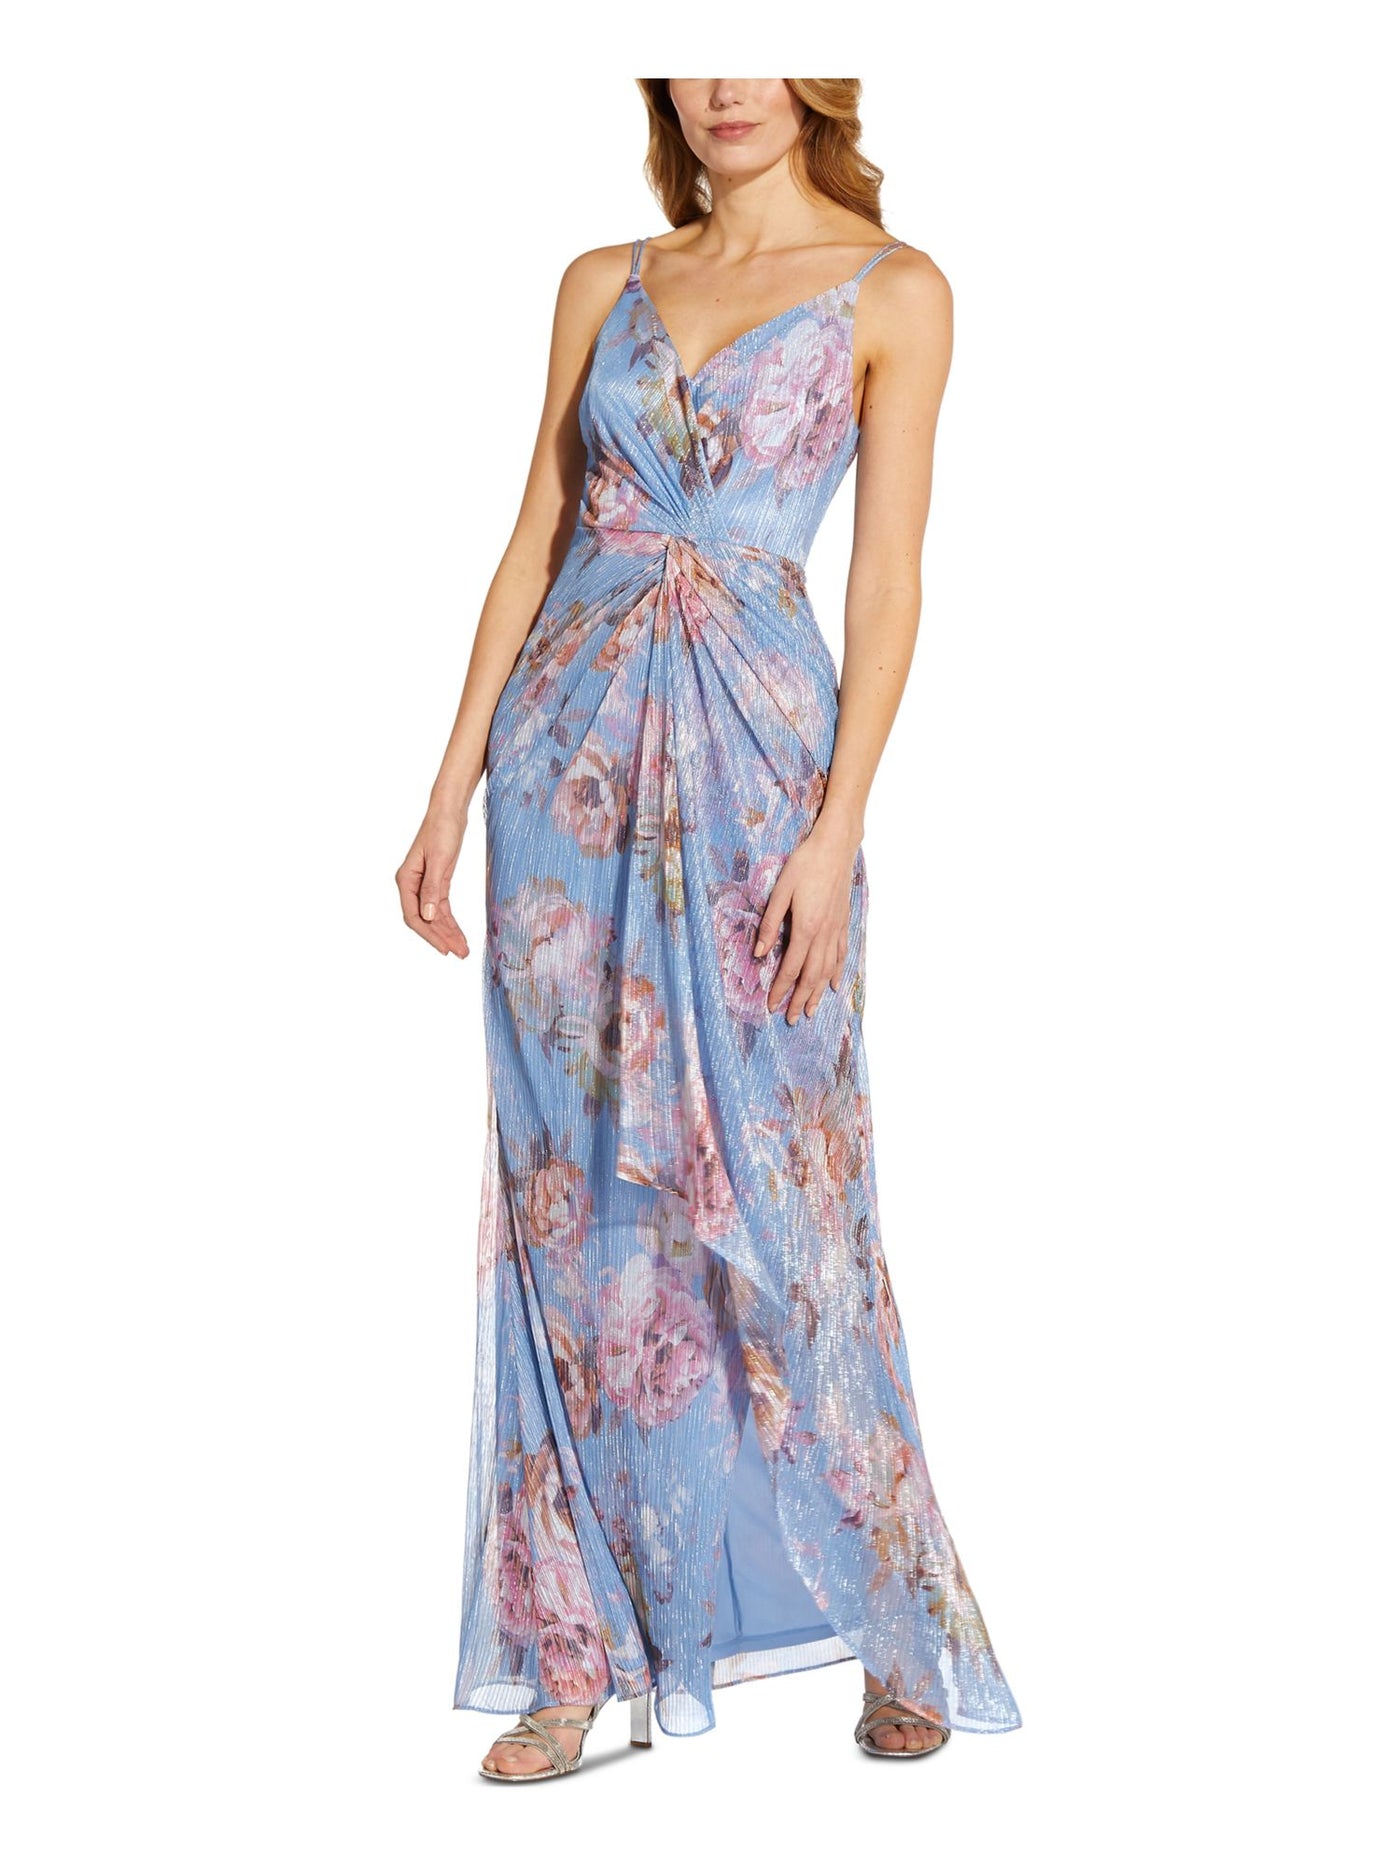 ADRIANNA PAPELL Womens Blue Stretch Metallic Twist Front Crinkle Sheer Lined Floral Spaghetti Strap Surplice Neckline Full-Length Evening Gown Dress 14